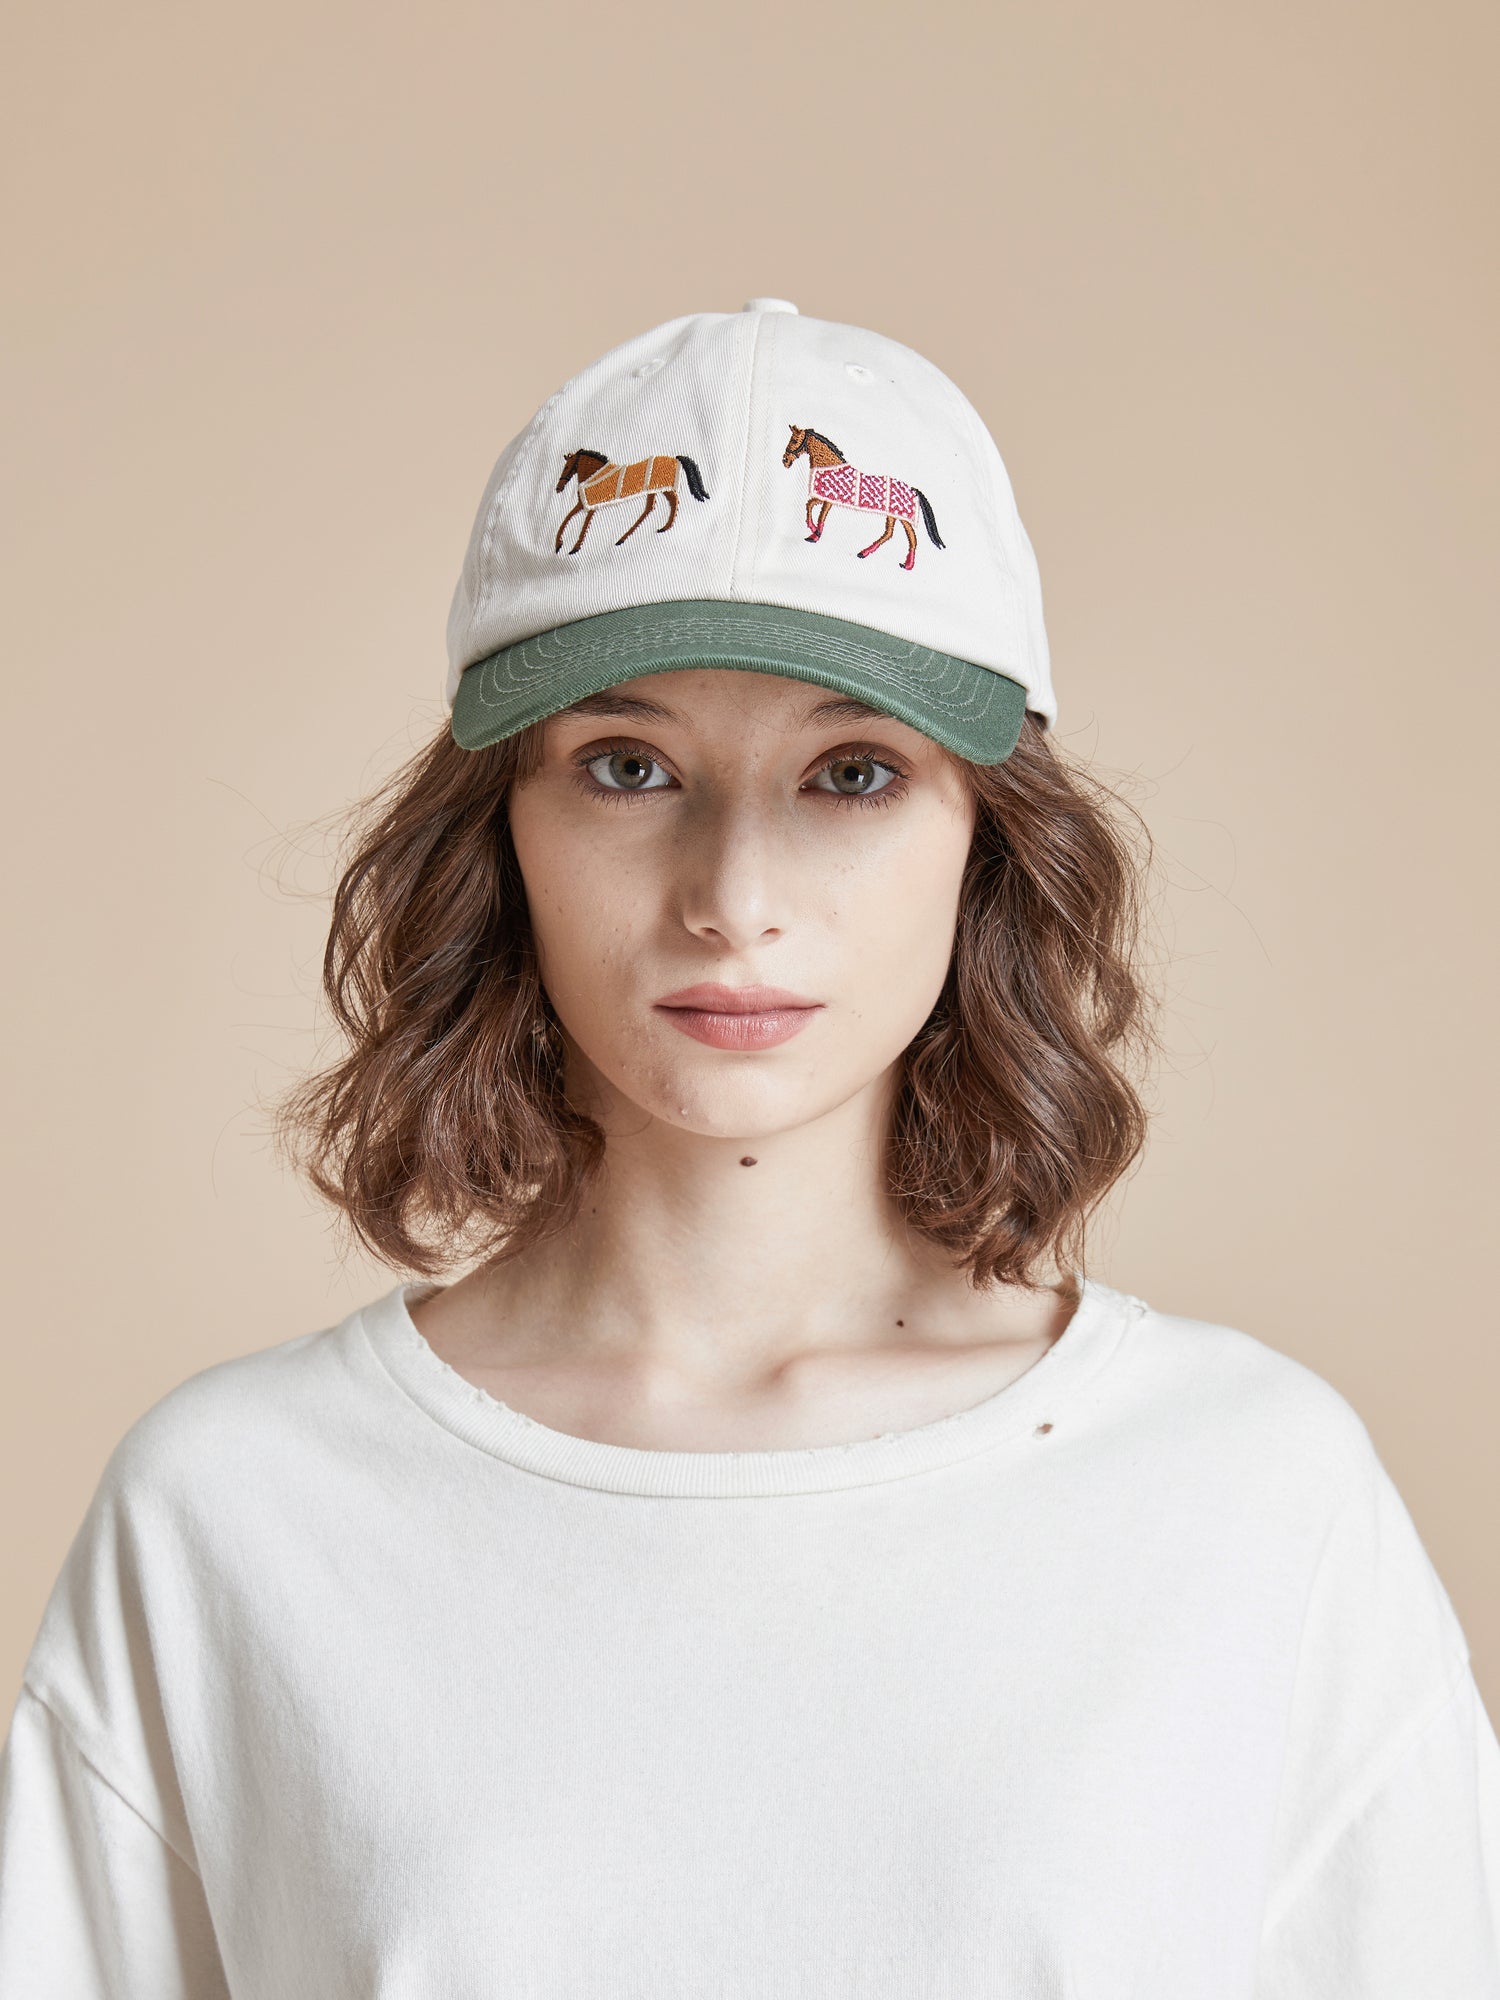 A woman wearing a white t-shirt with embroidered horses from the Found Horse Equine Cap brand on it.